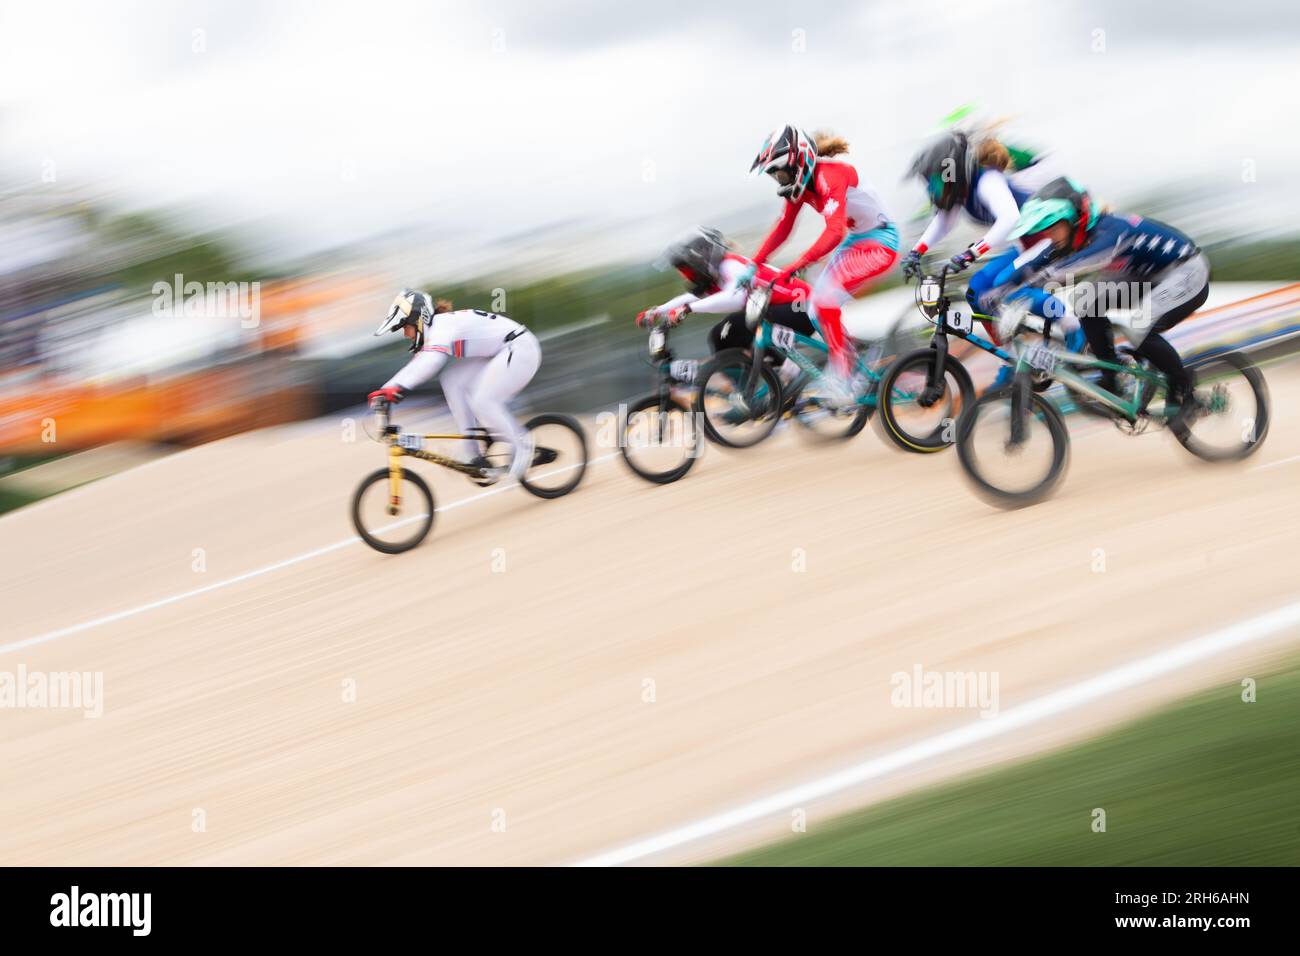 Bethany Shriever leading from the front in UCI Cycling world championships 2023 BMX racing quarter final to qualify for semis - Glasgow, Scotland, UK Stock Photo